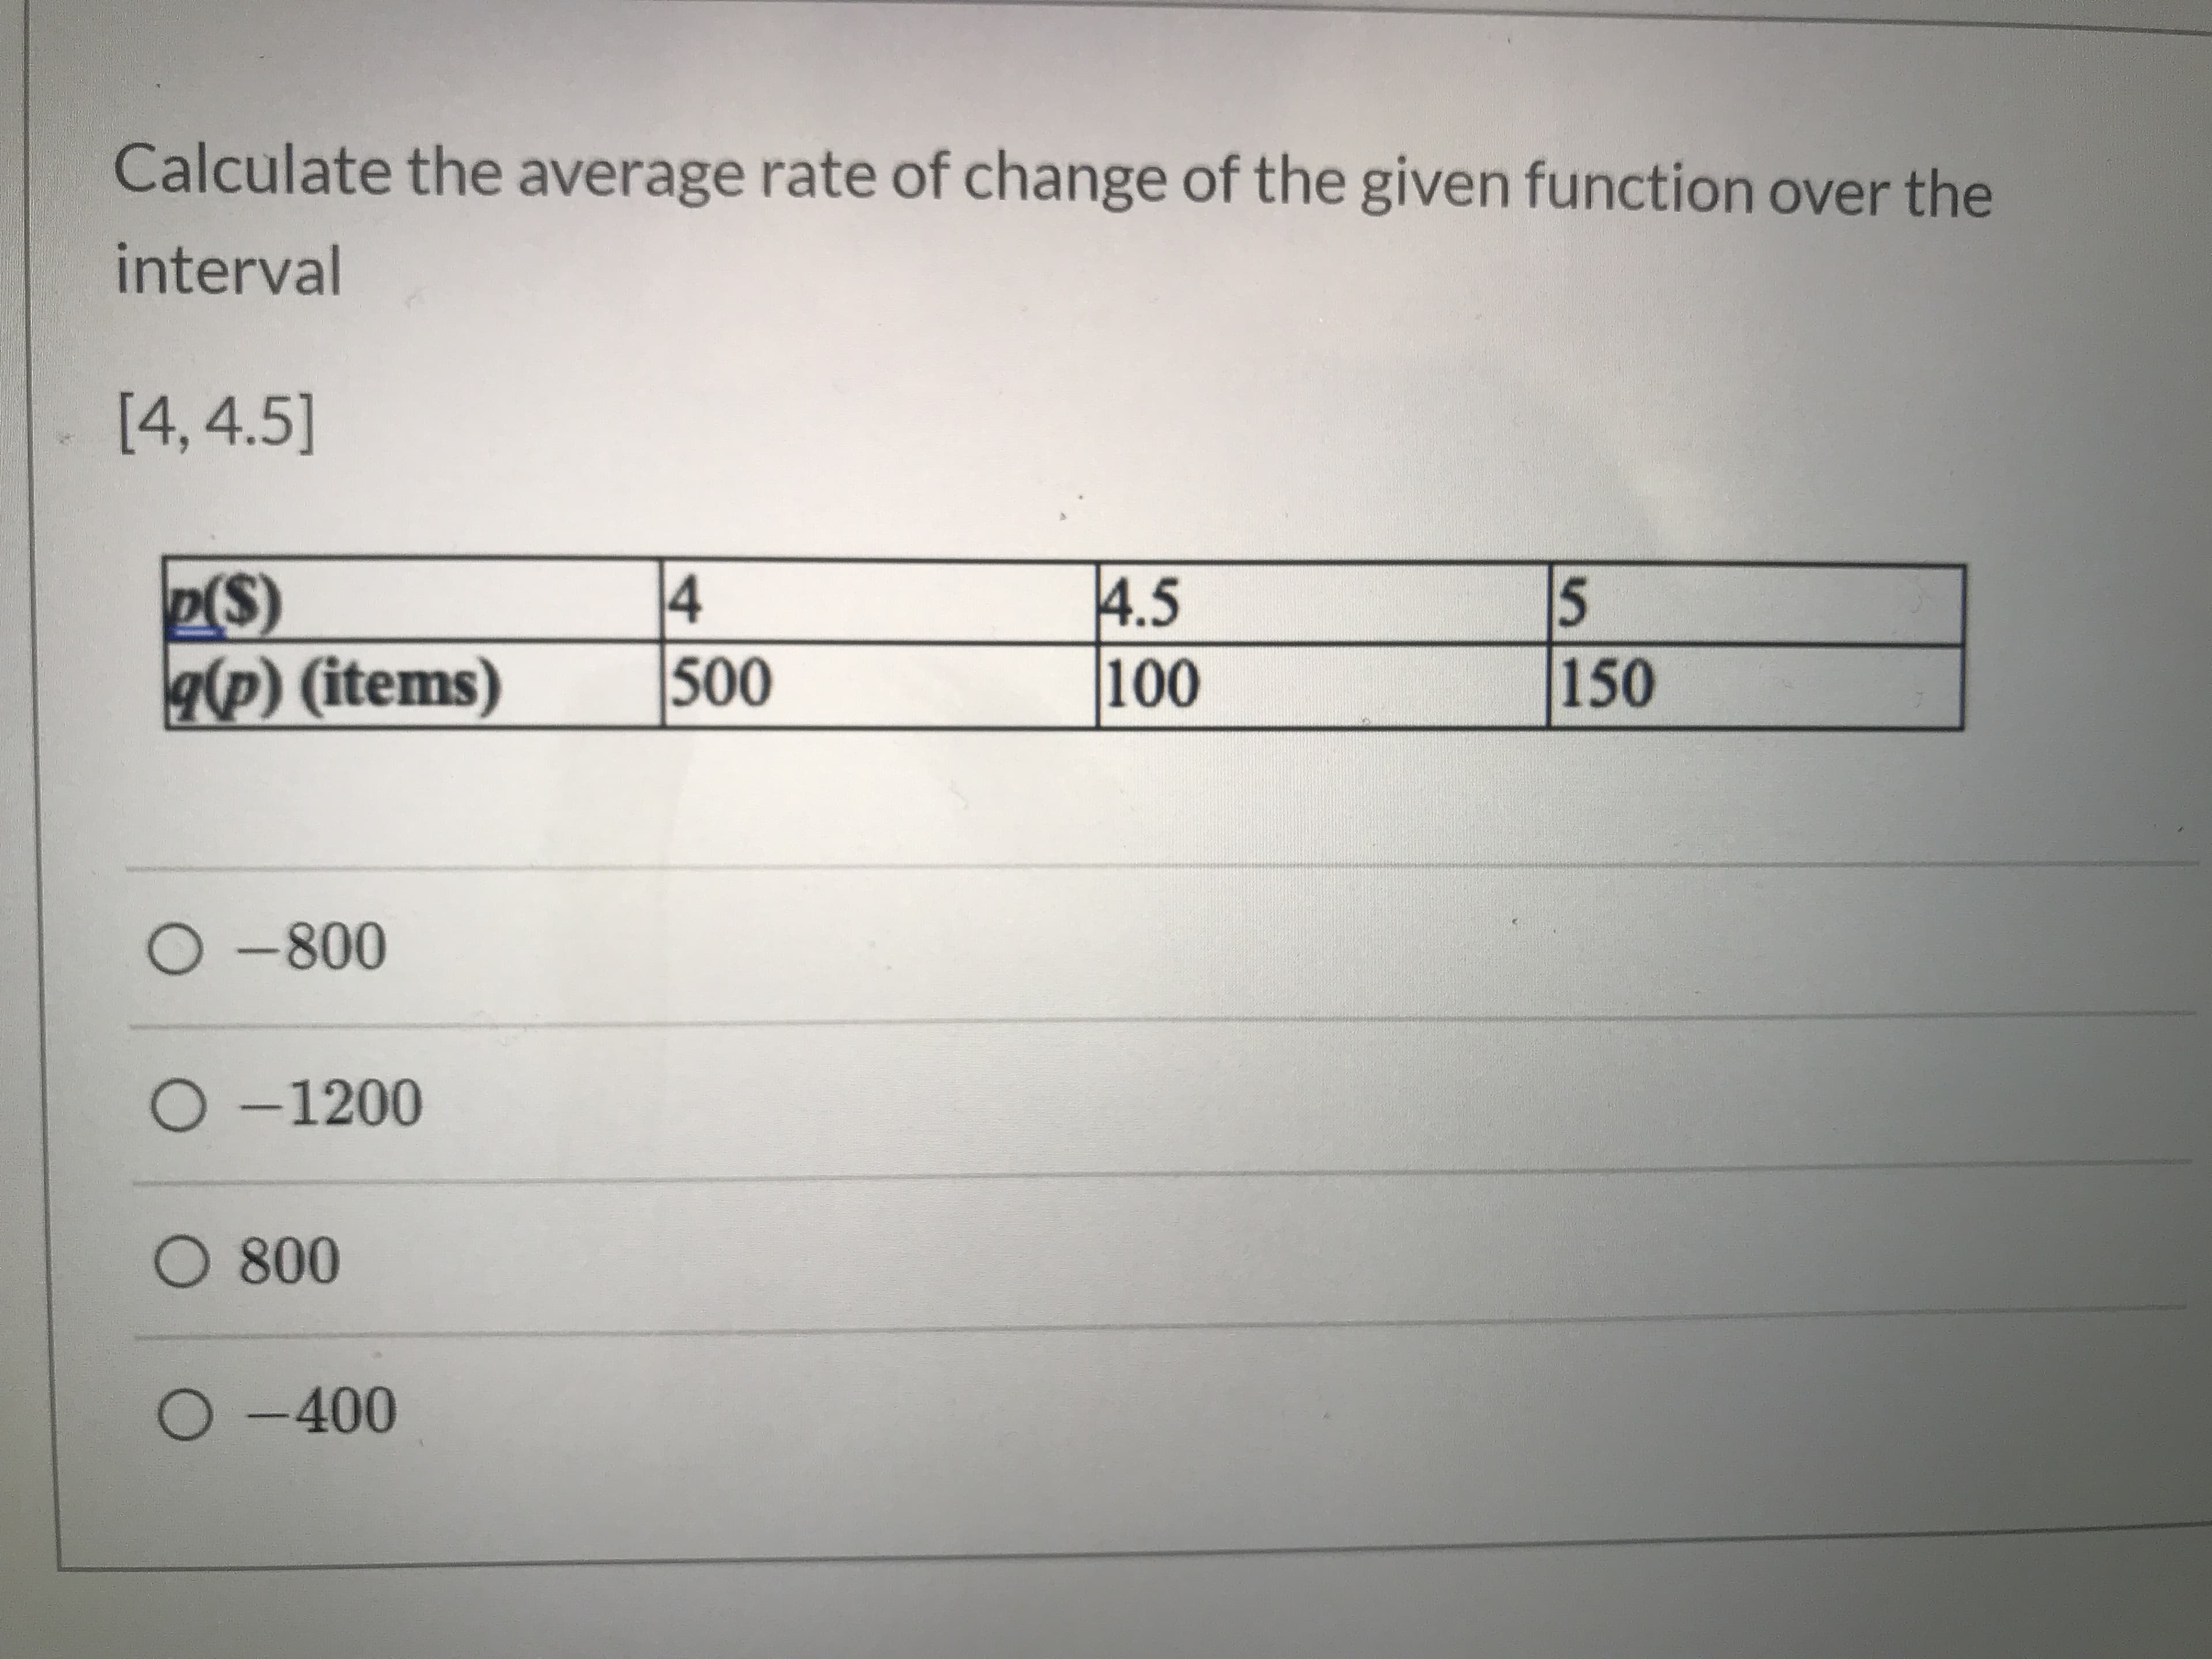 Calculate the average rate of change of the given function over the
interval
[4,4.5]
P(S)
(P) (items)
4.5
100
4
15
500
150
-800
O -1200
O 800
O-400
